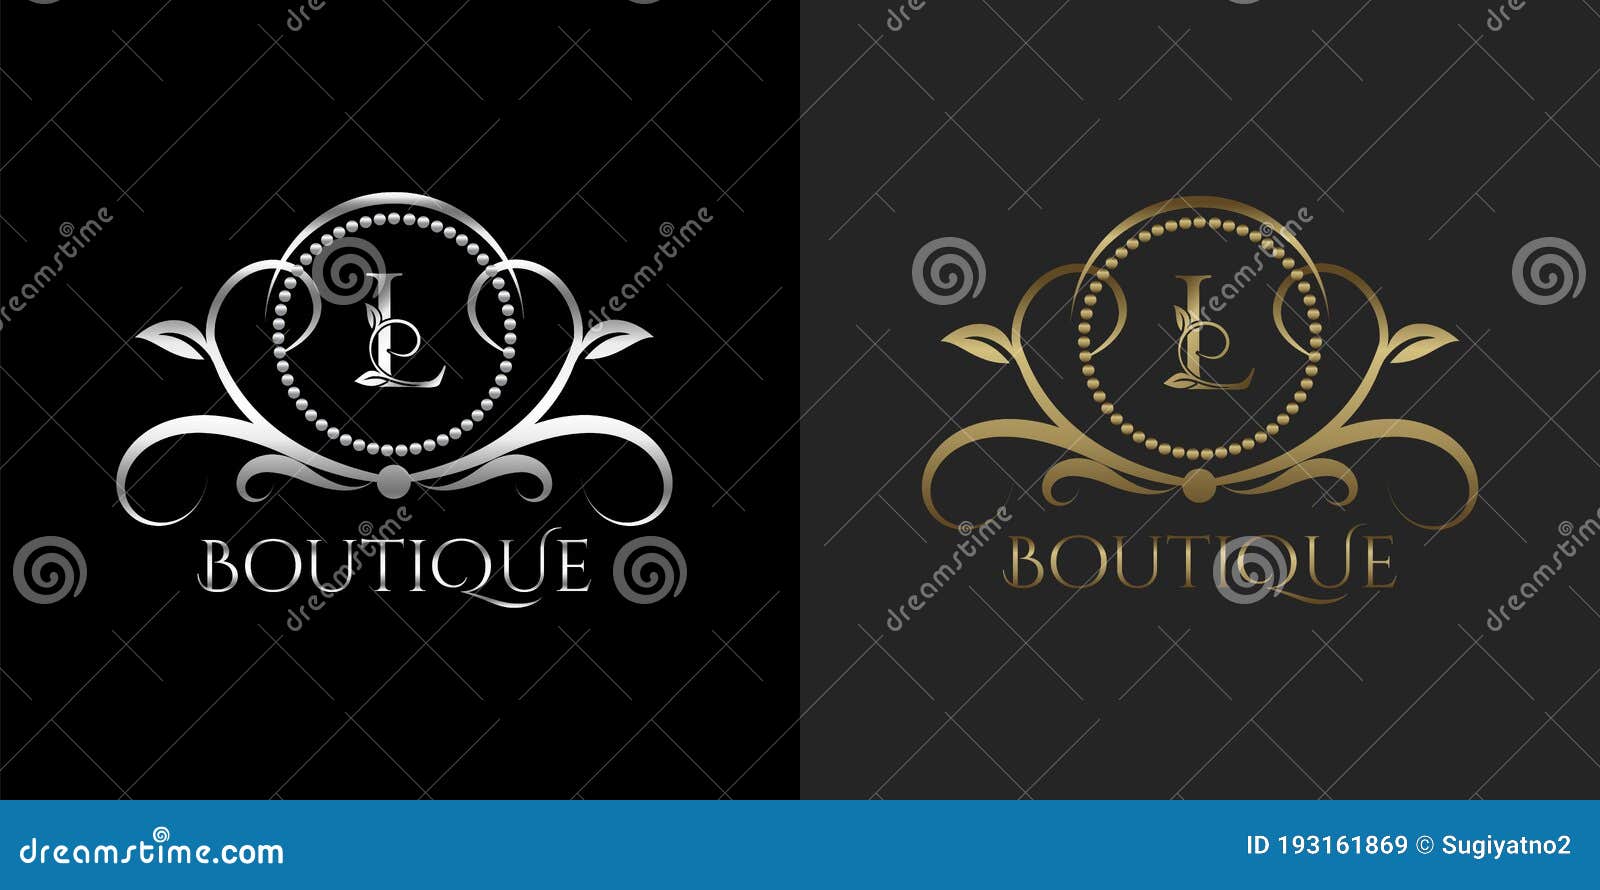 luxury logo letter l template  circle for restaurant, royalty, boutique, cafe, hotel, heraldic, jewelry, fashion